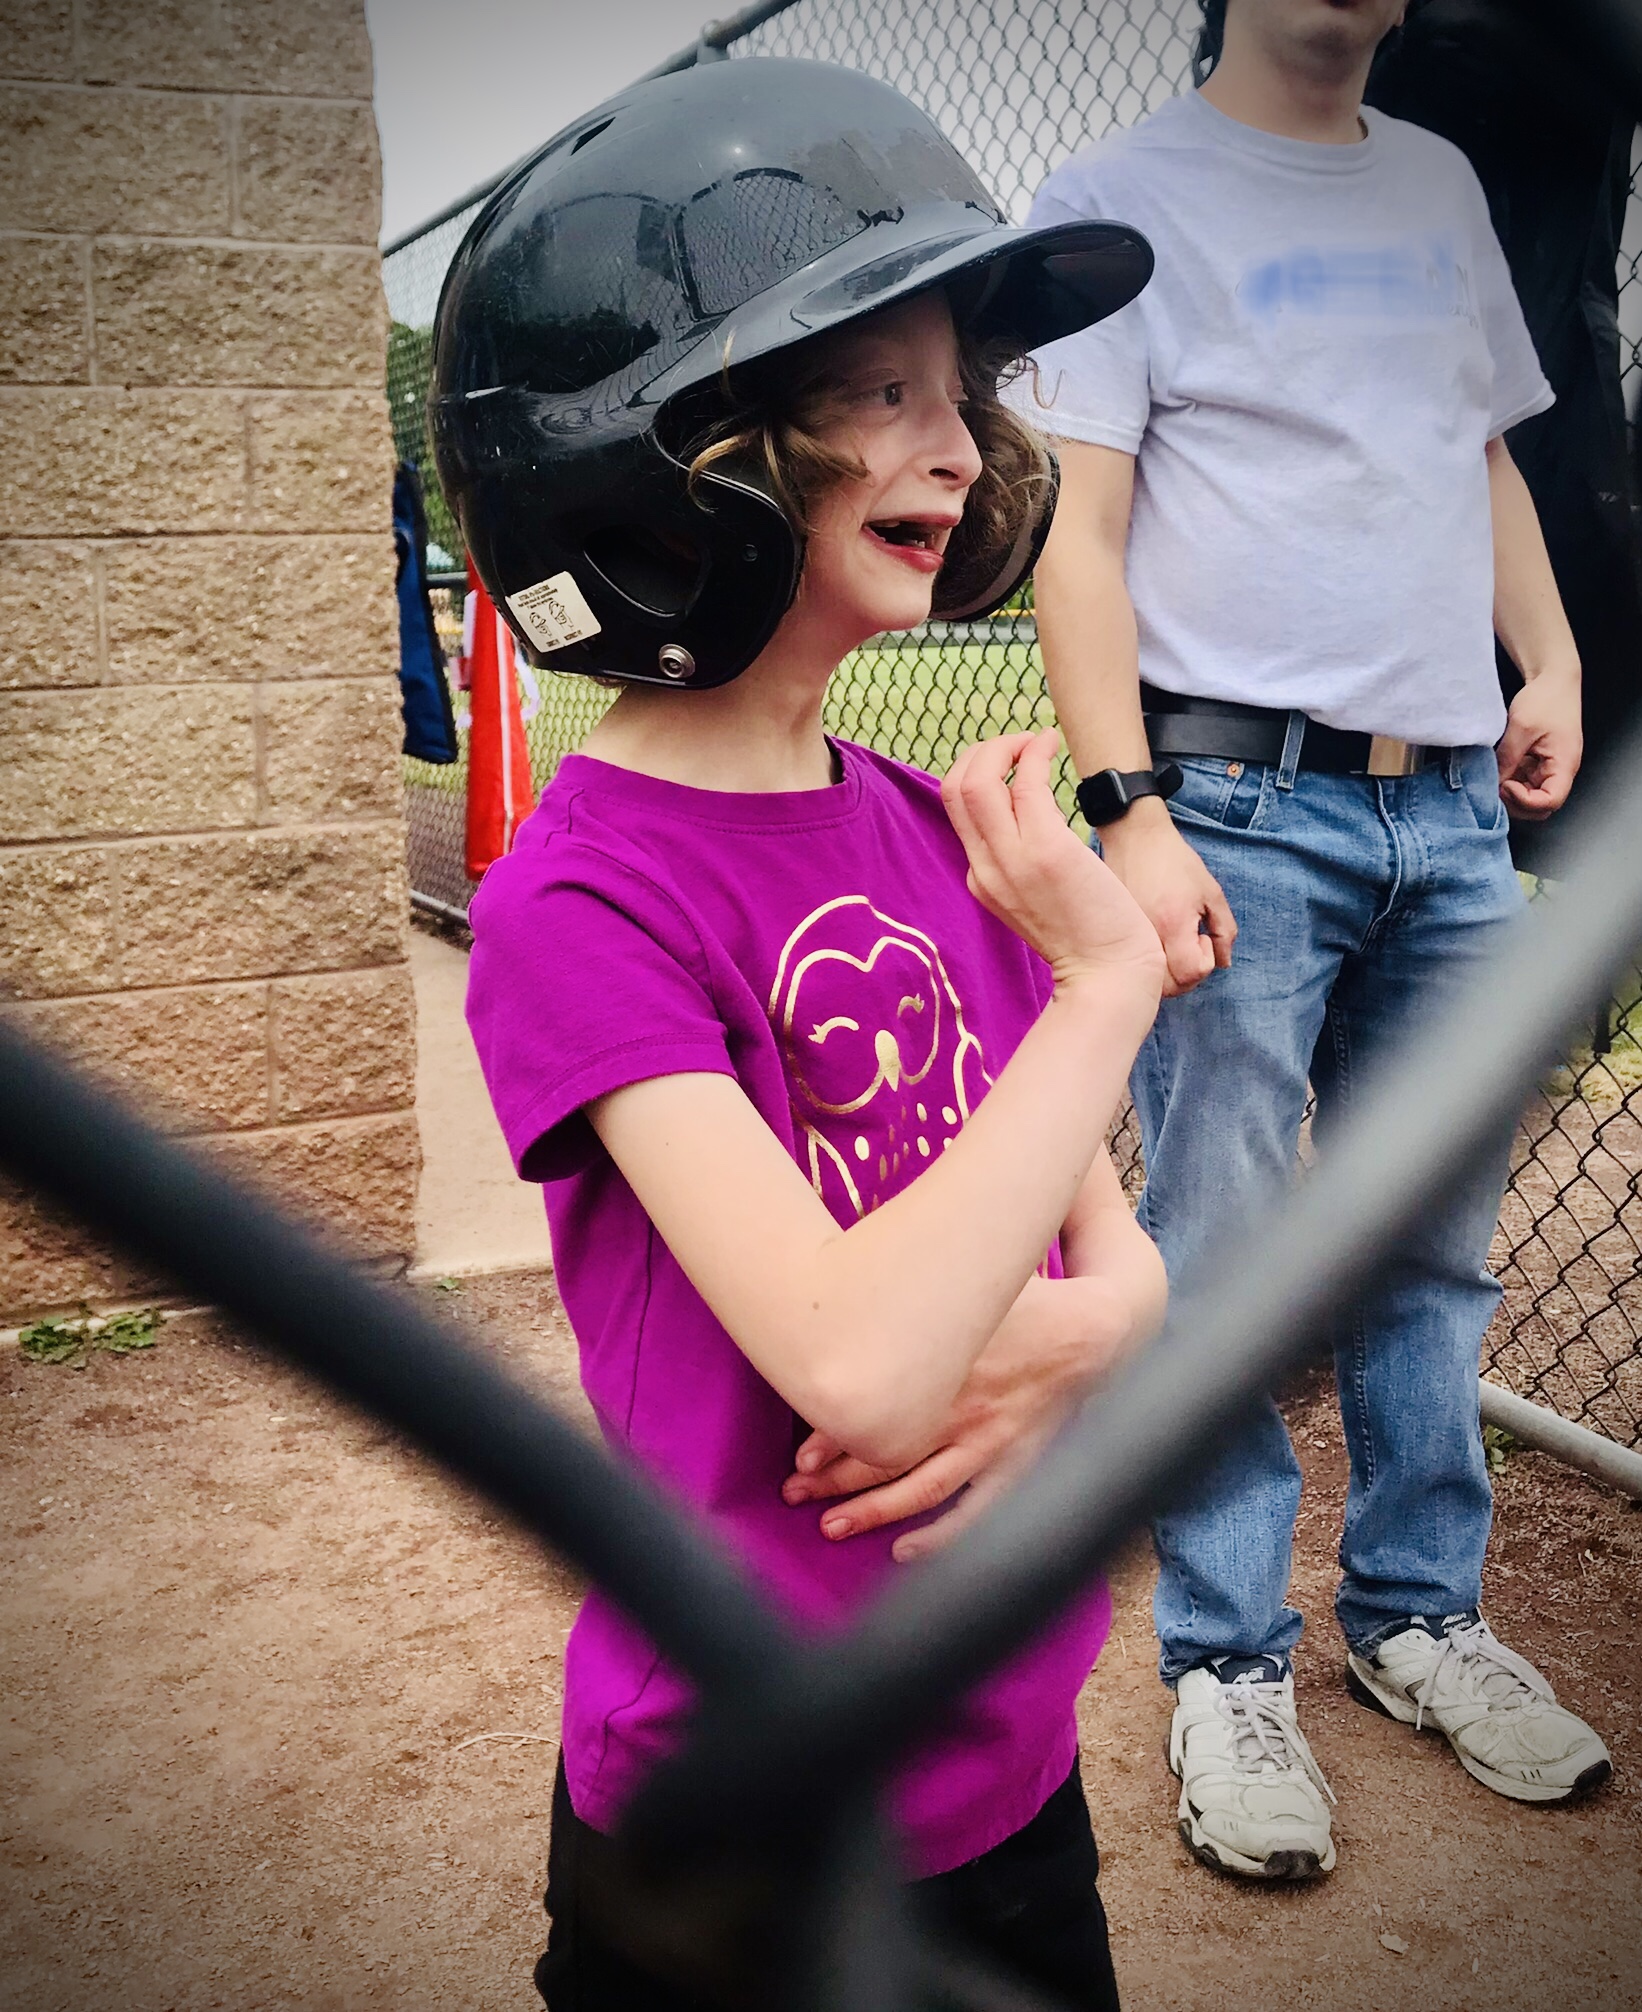 Fiona at a little league baseball game. (Courtesy of Heather Lanier)